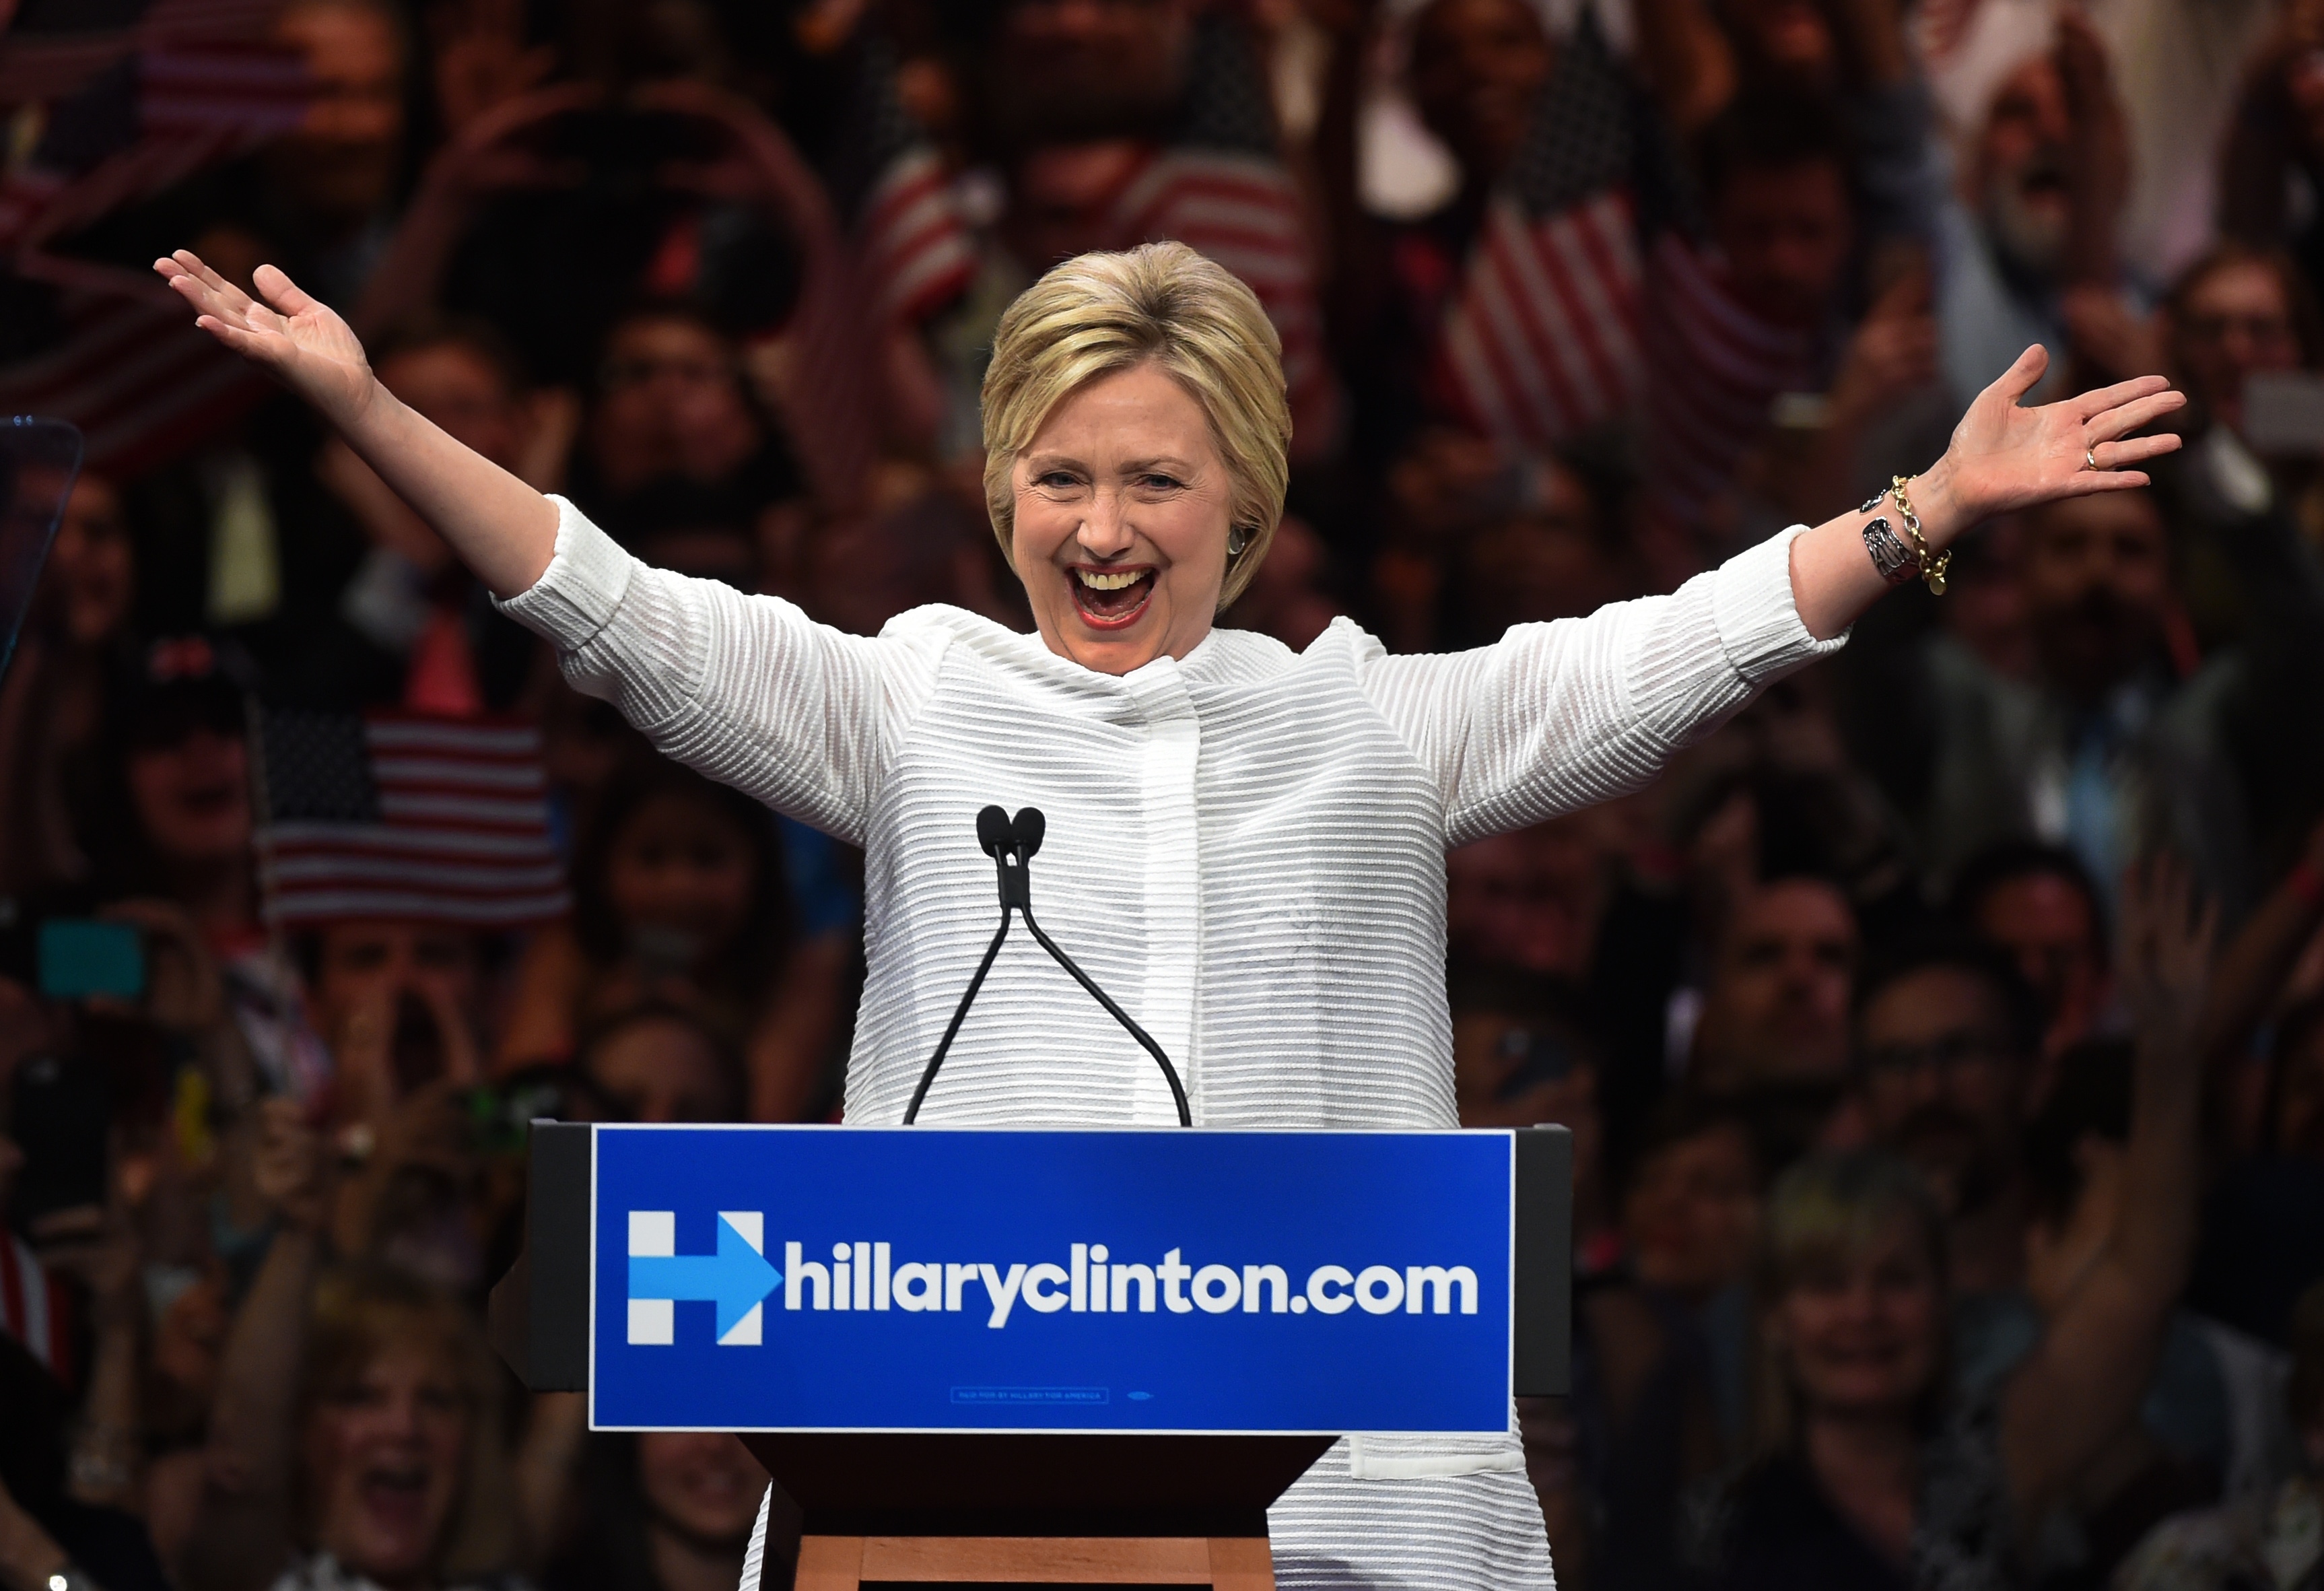 Democratic presidential candidate Hillary Clinton celebrates on stage during her primary night event at the Duggal Greenhouse, Brooklyn Navy Yard on June 7, 2016 in New York. (Timothy A. Clary—AFP/Getty Images)